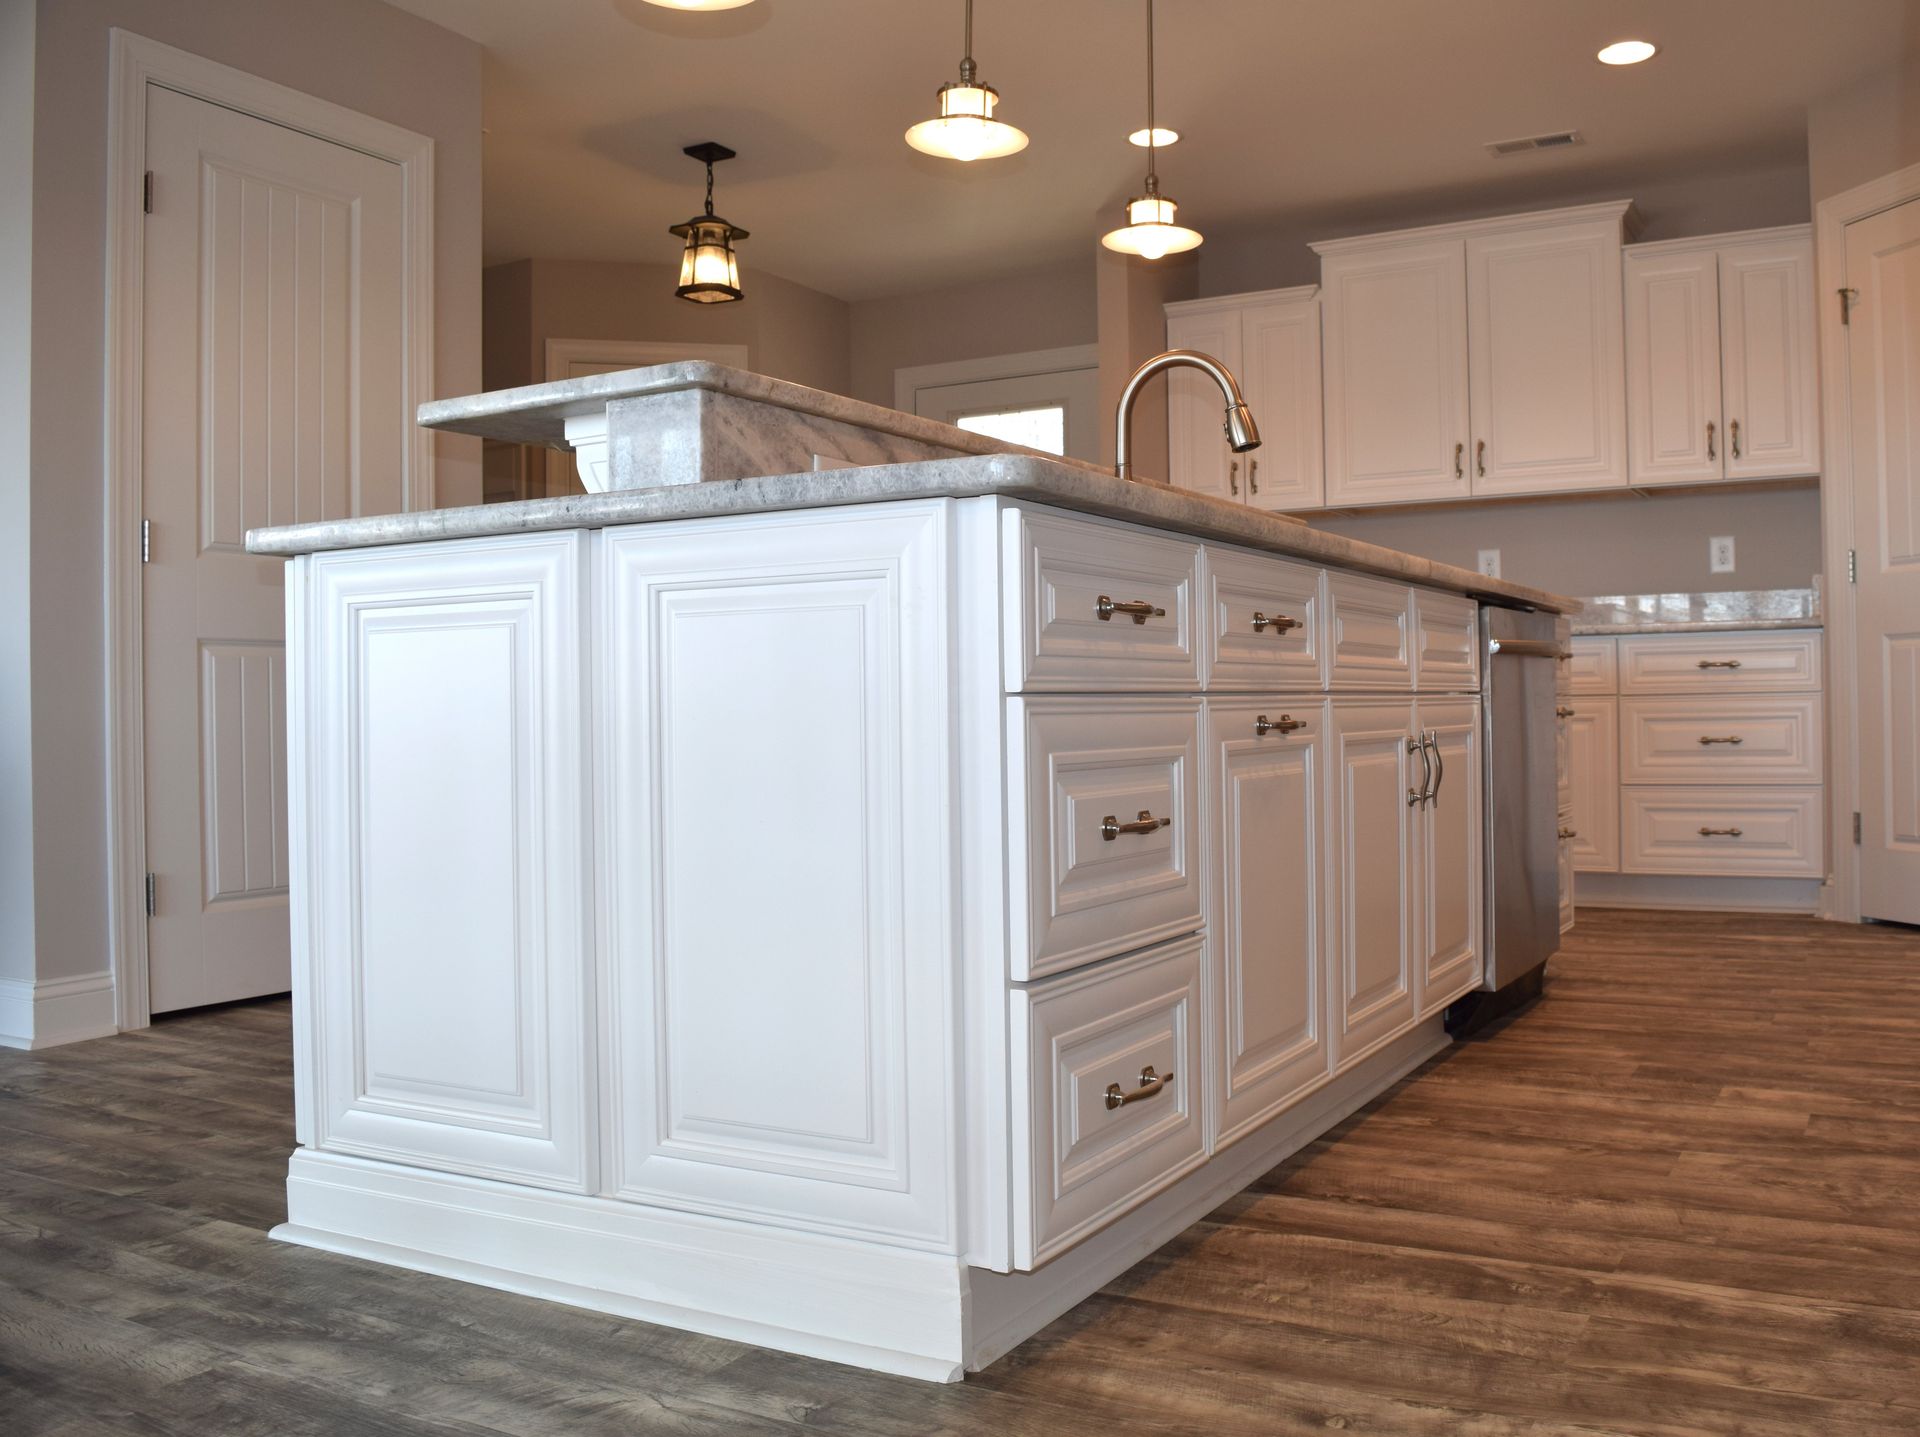 national kitchen and bath association cabinetry